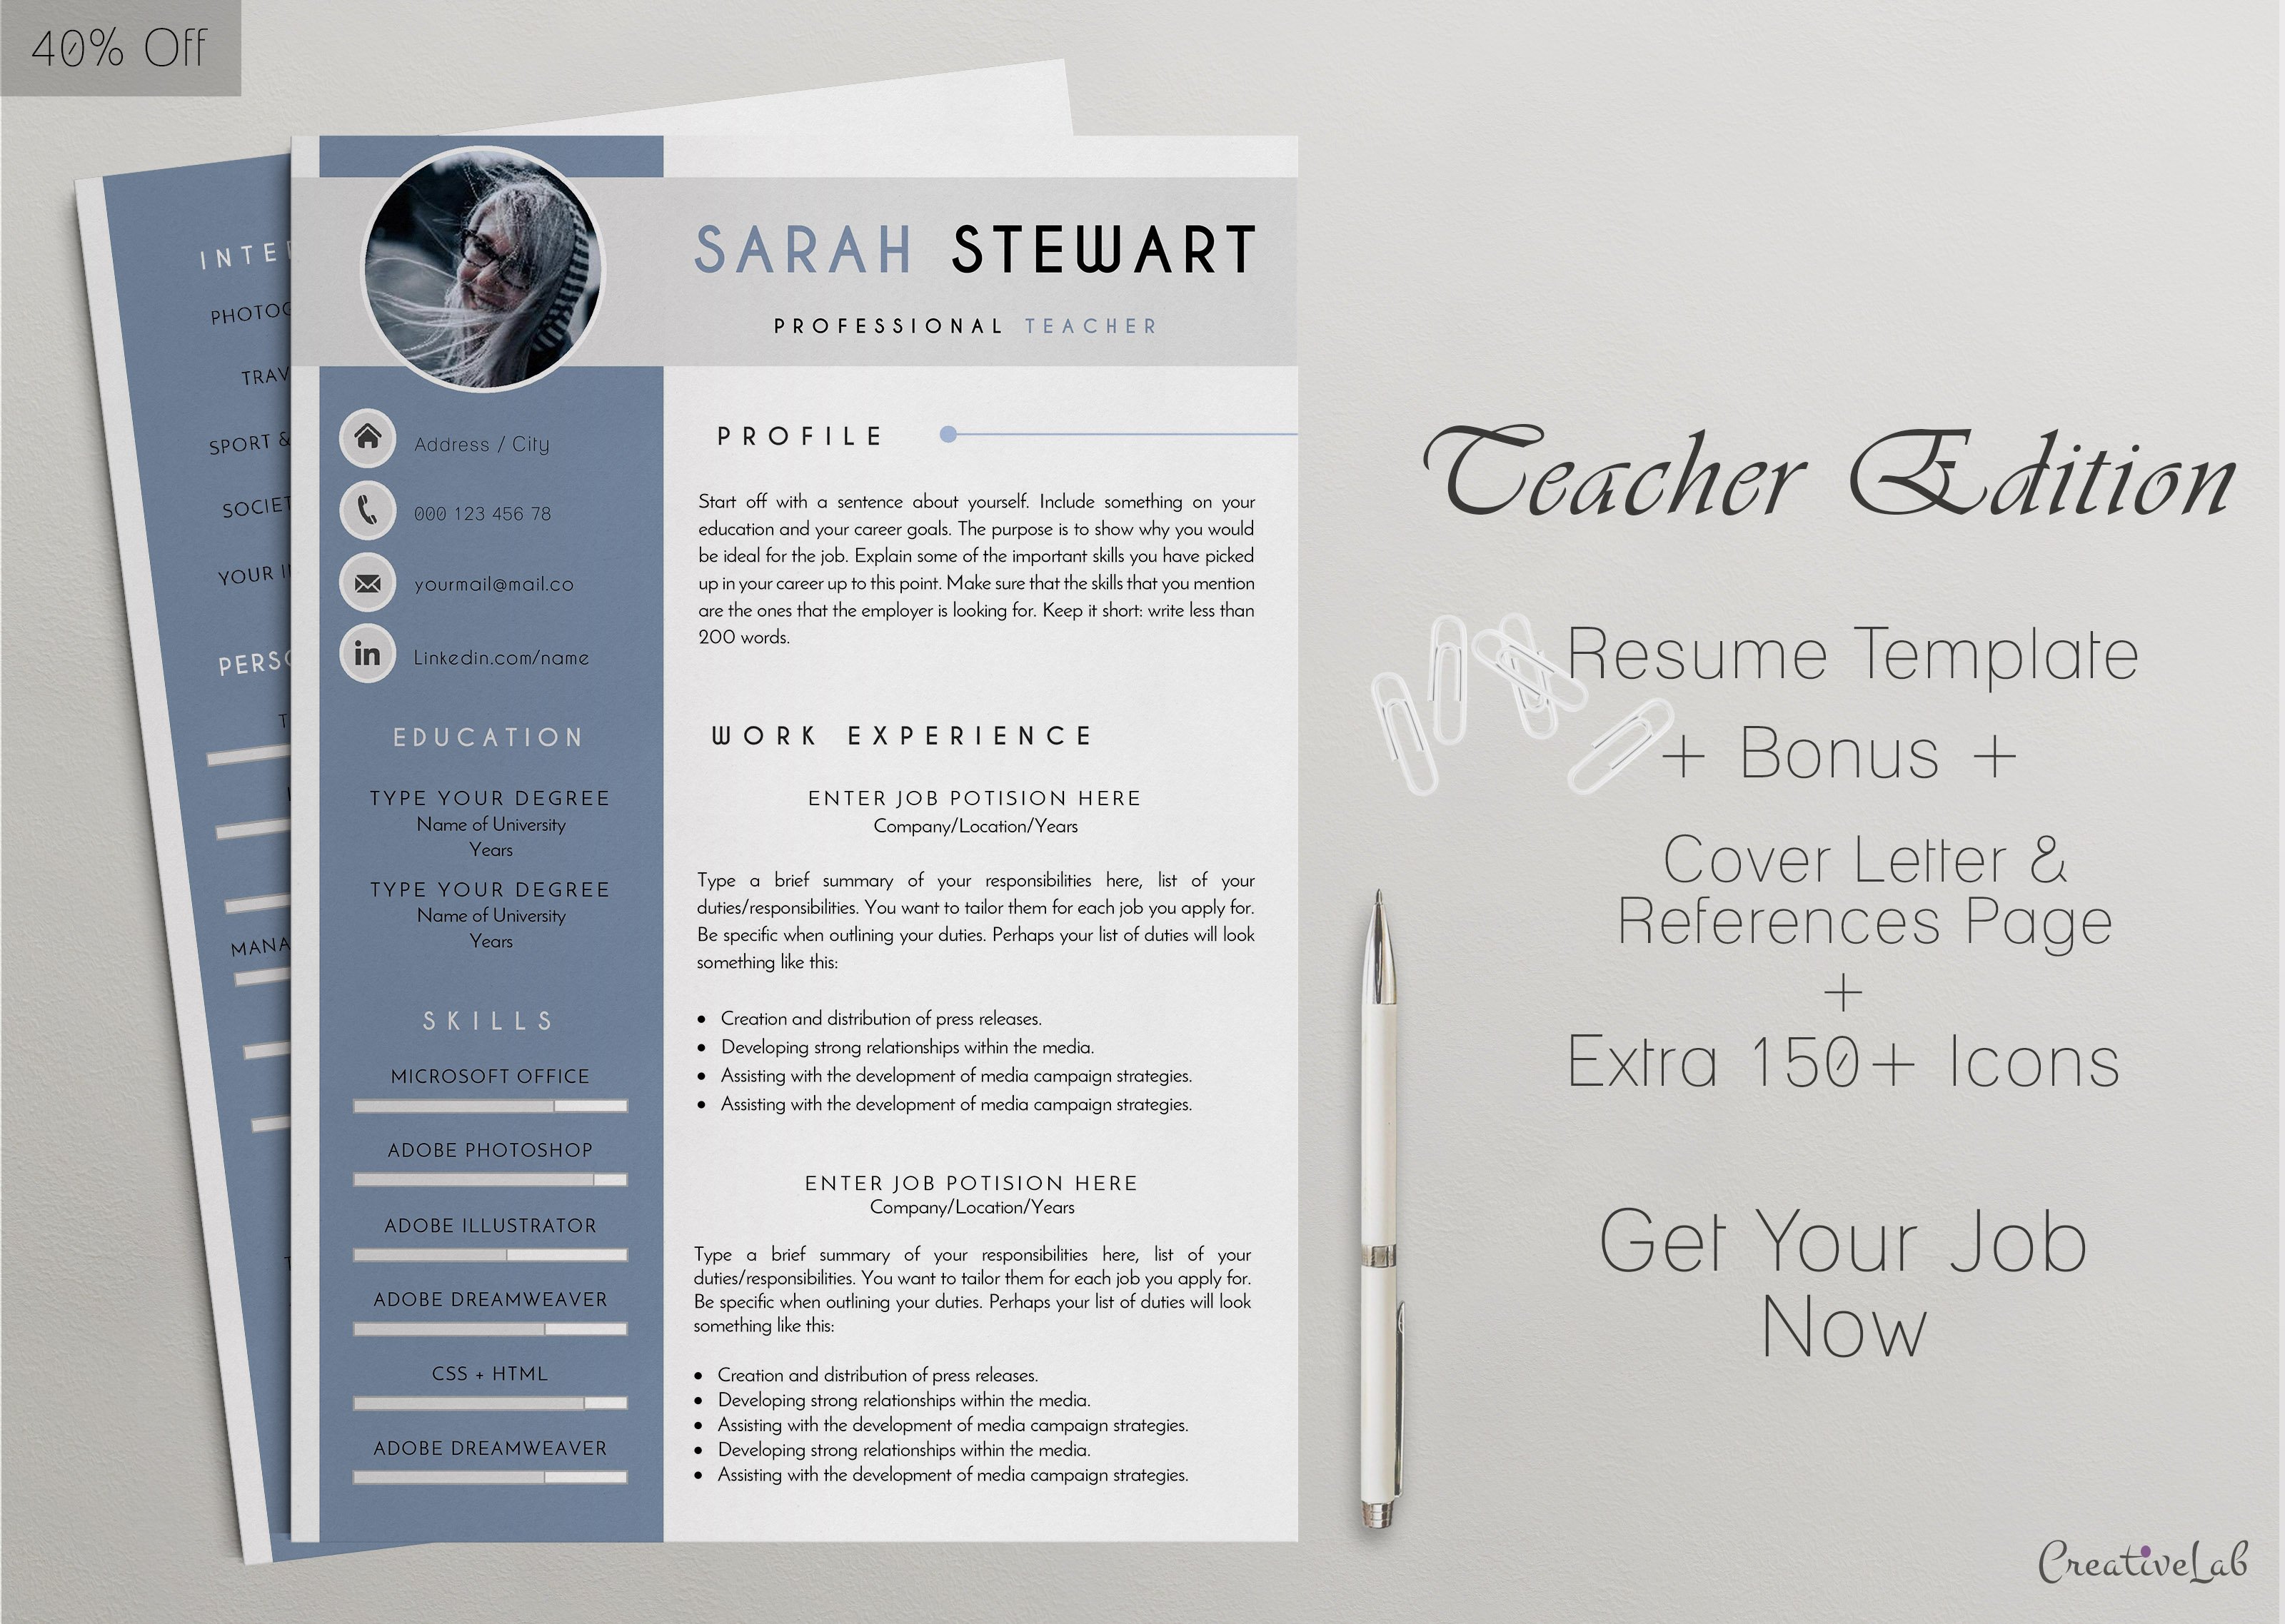 Profesional Resume Templates cover image.